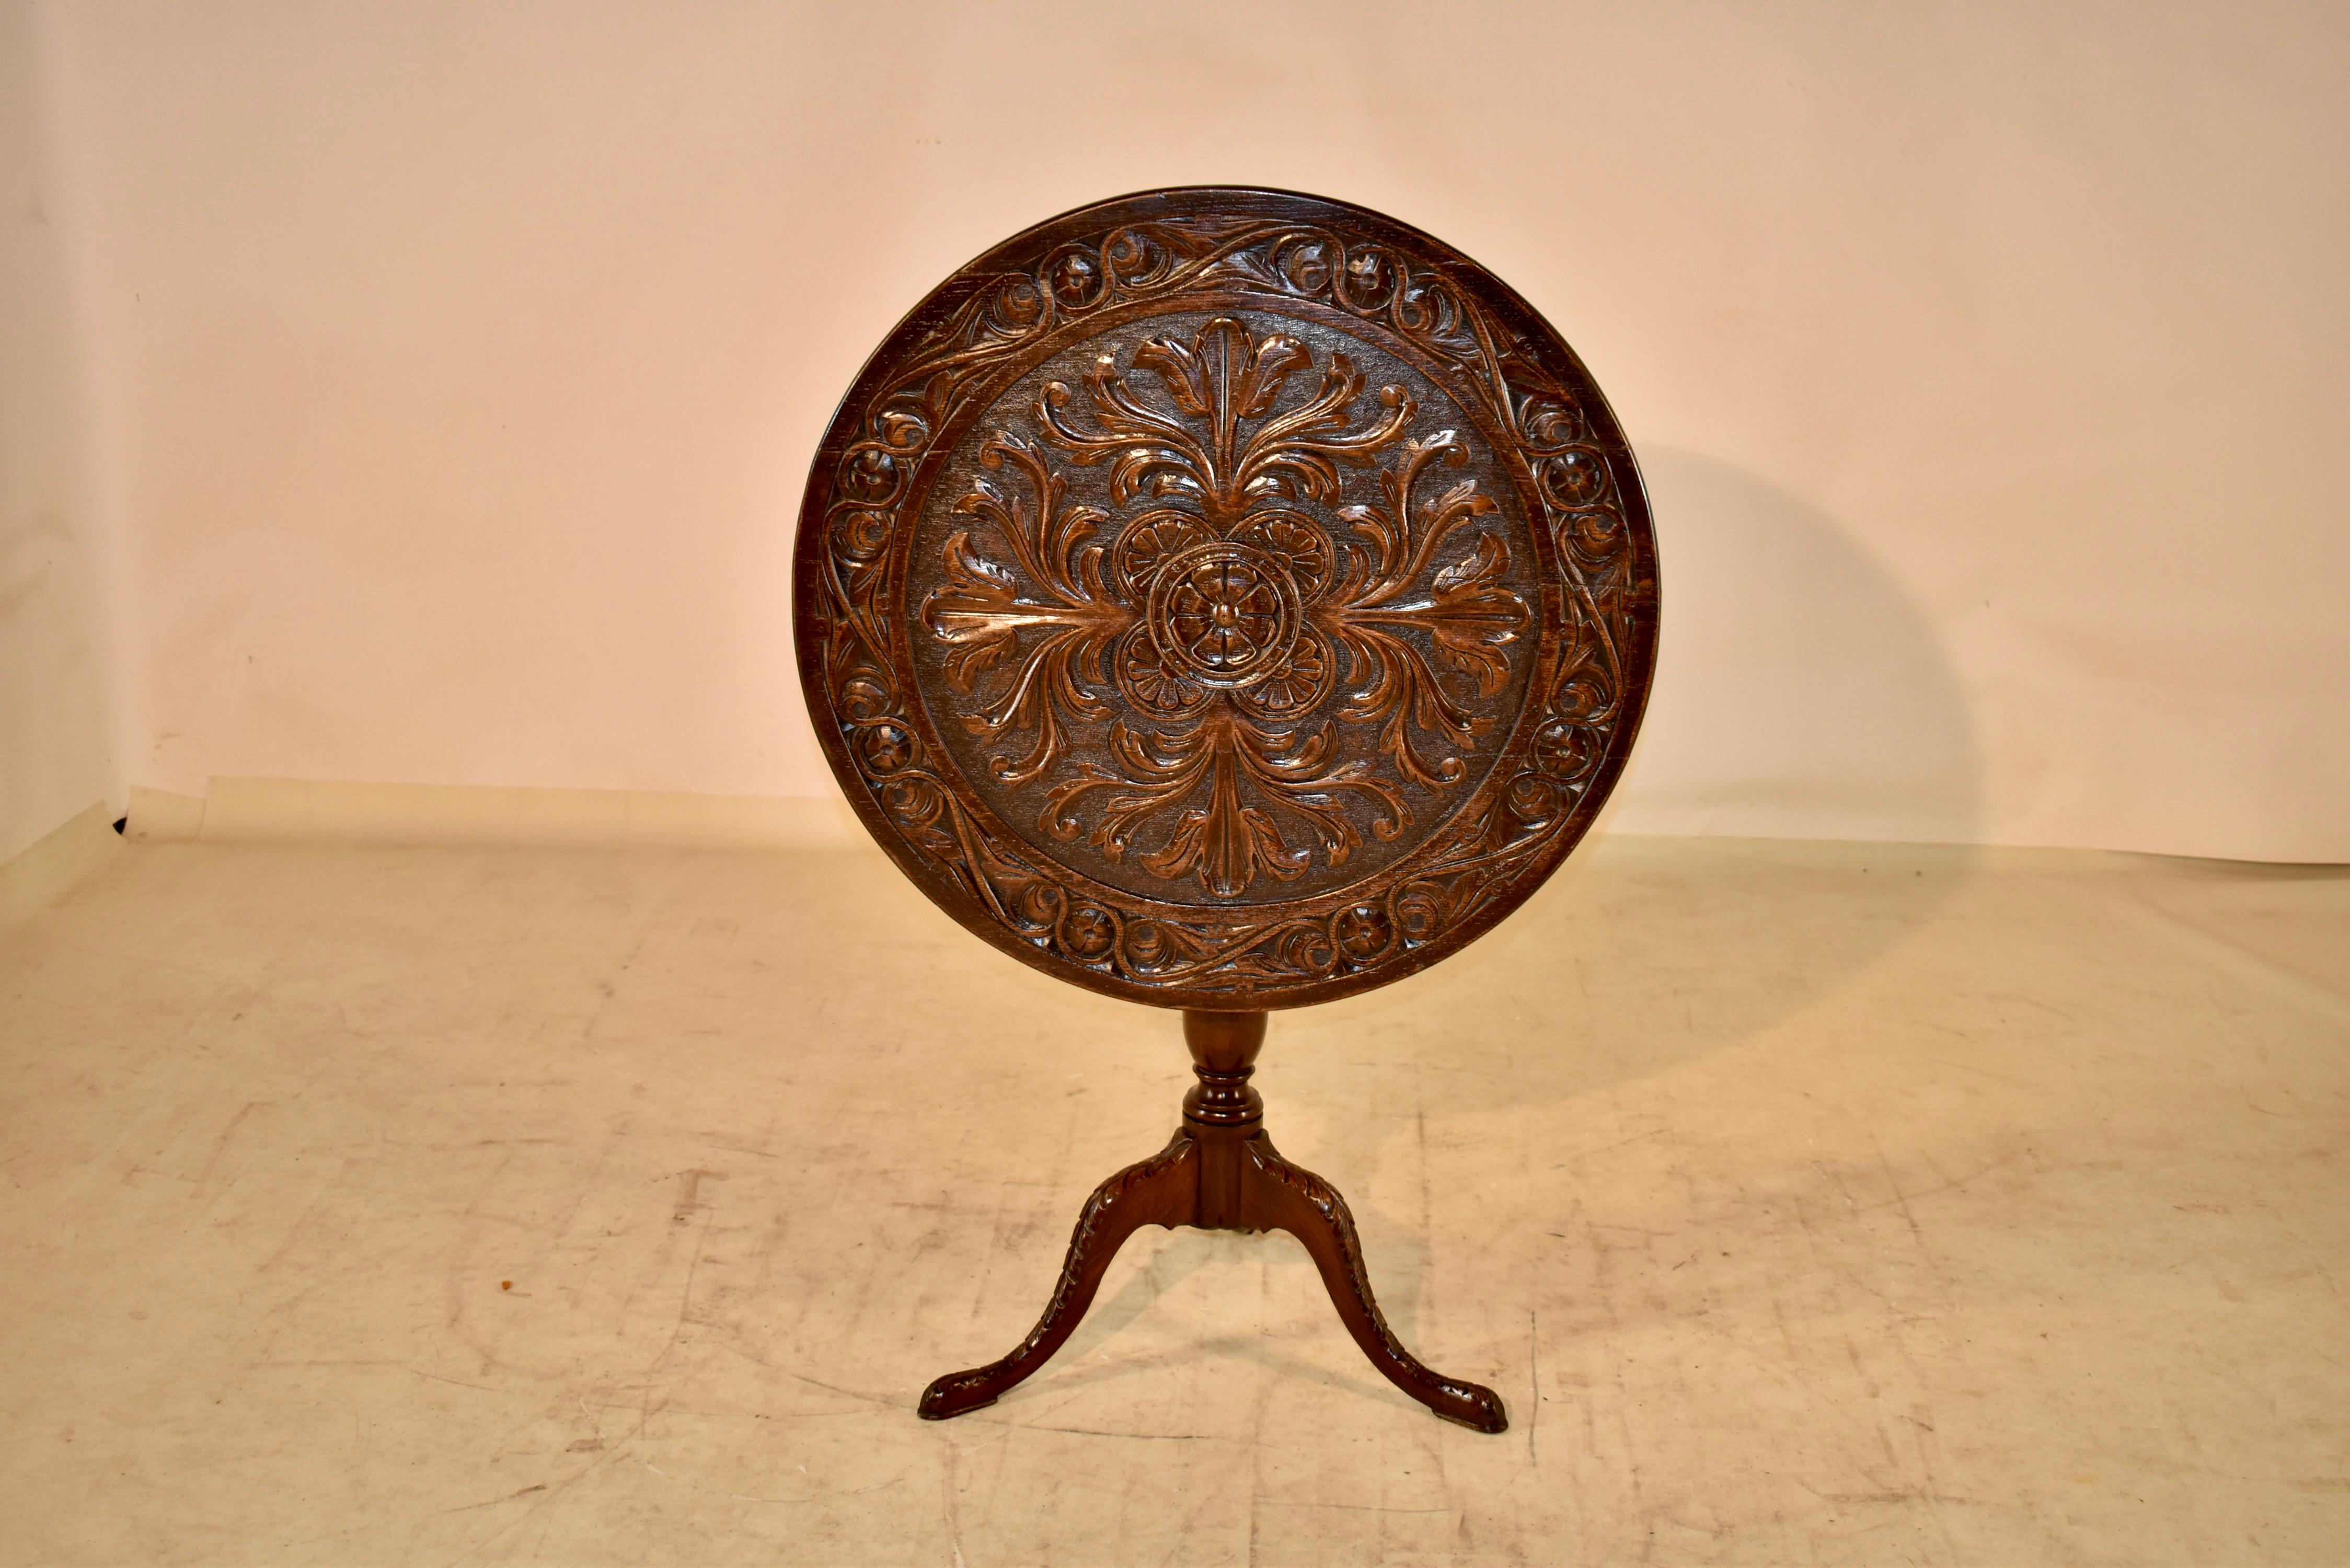 18th century oak tilt-top side table from England with an exquisitely hand carved decorated top. The top is banded and is in a scrolled pattern, surrounding the central medallion, which has a rosette in the center, surrounded by scrolling acanthus